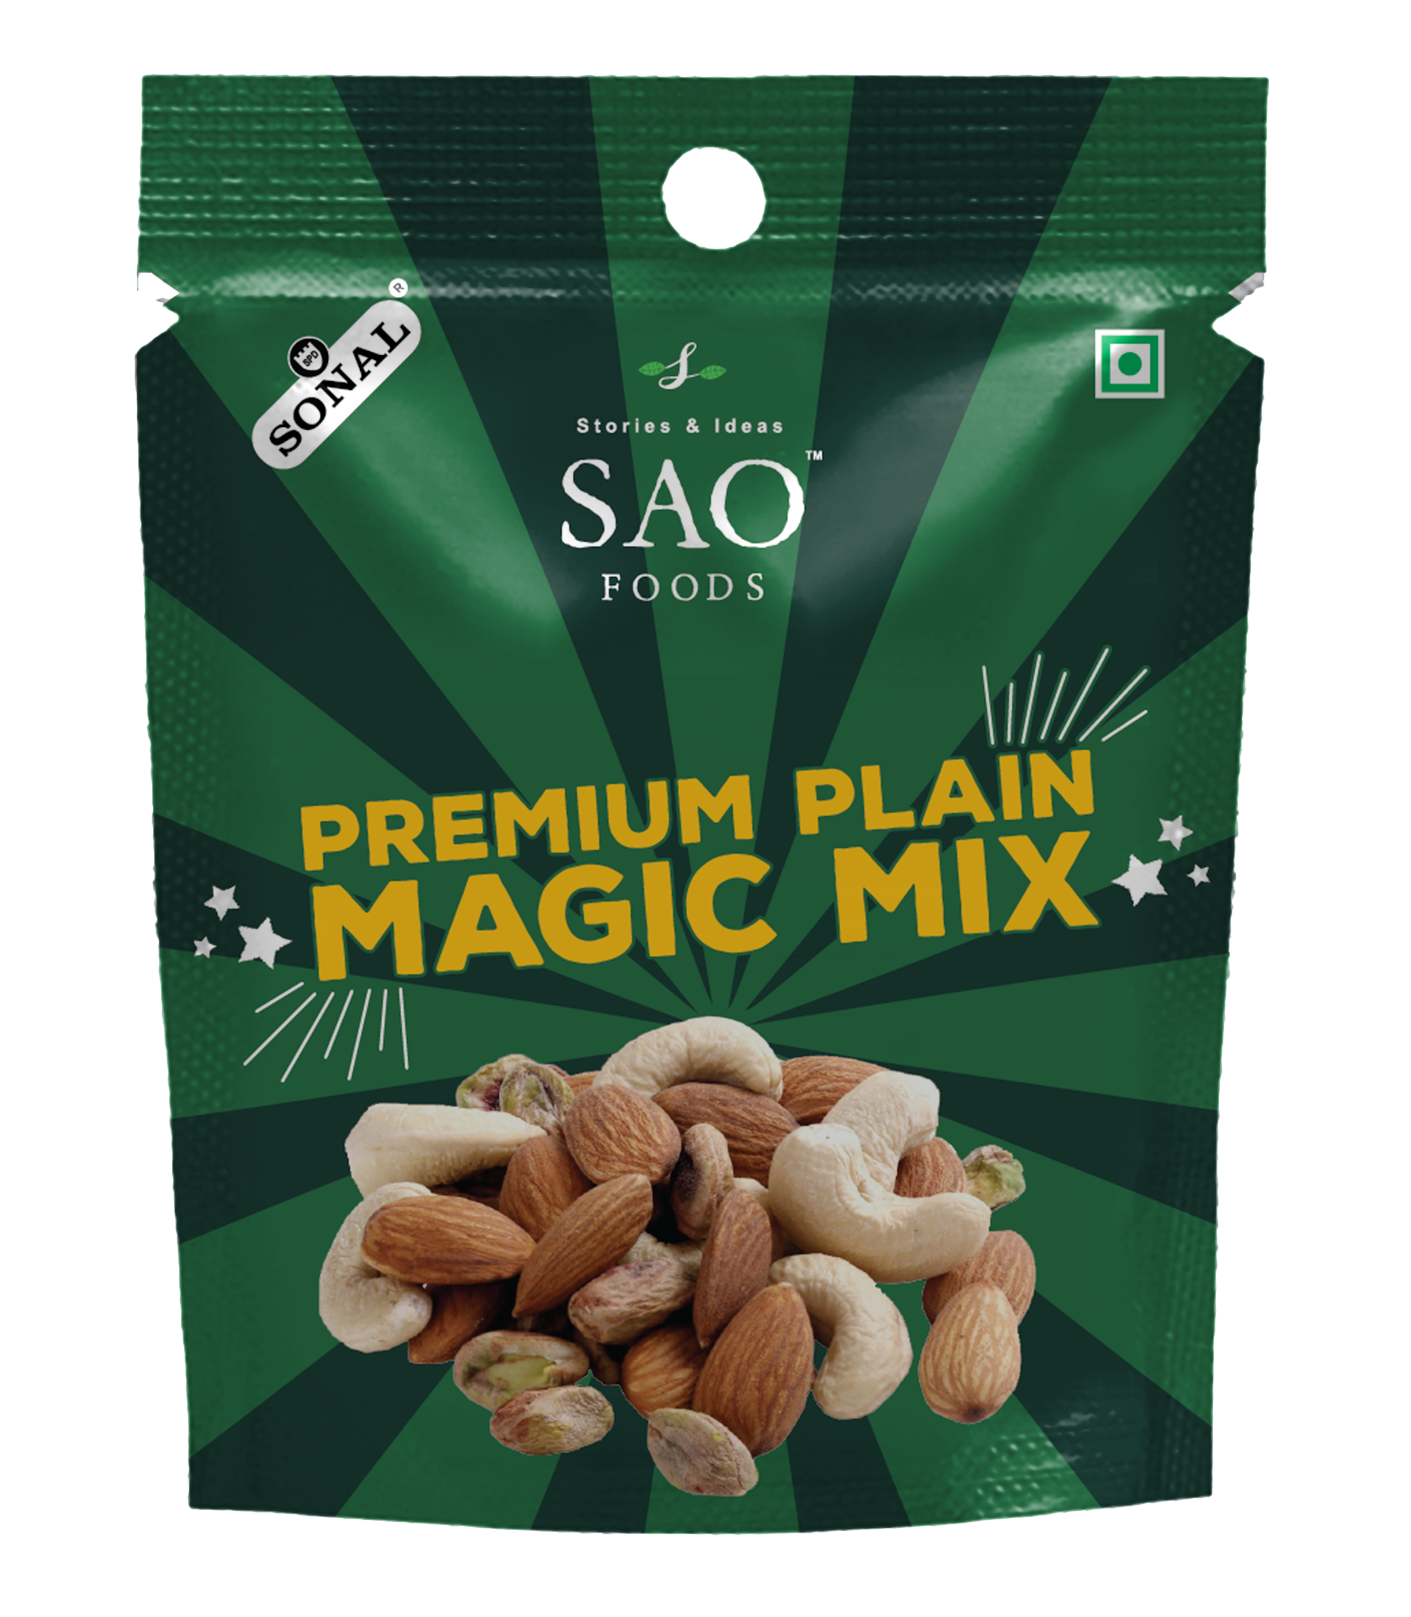 SAO FOODS Roasted & Unsalted Premium Plain Magic Mix Rs.20 each (10 small snacking packs of 12gm each)